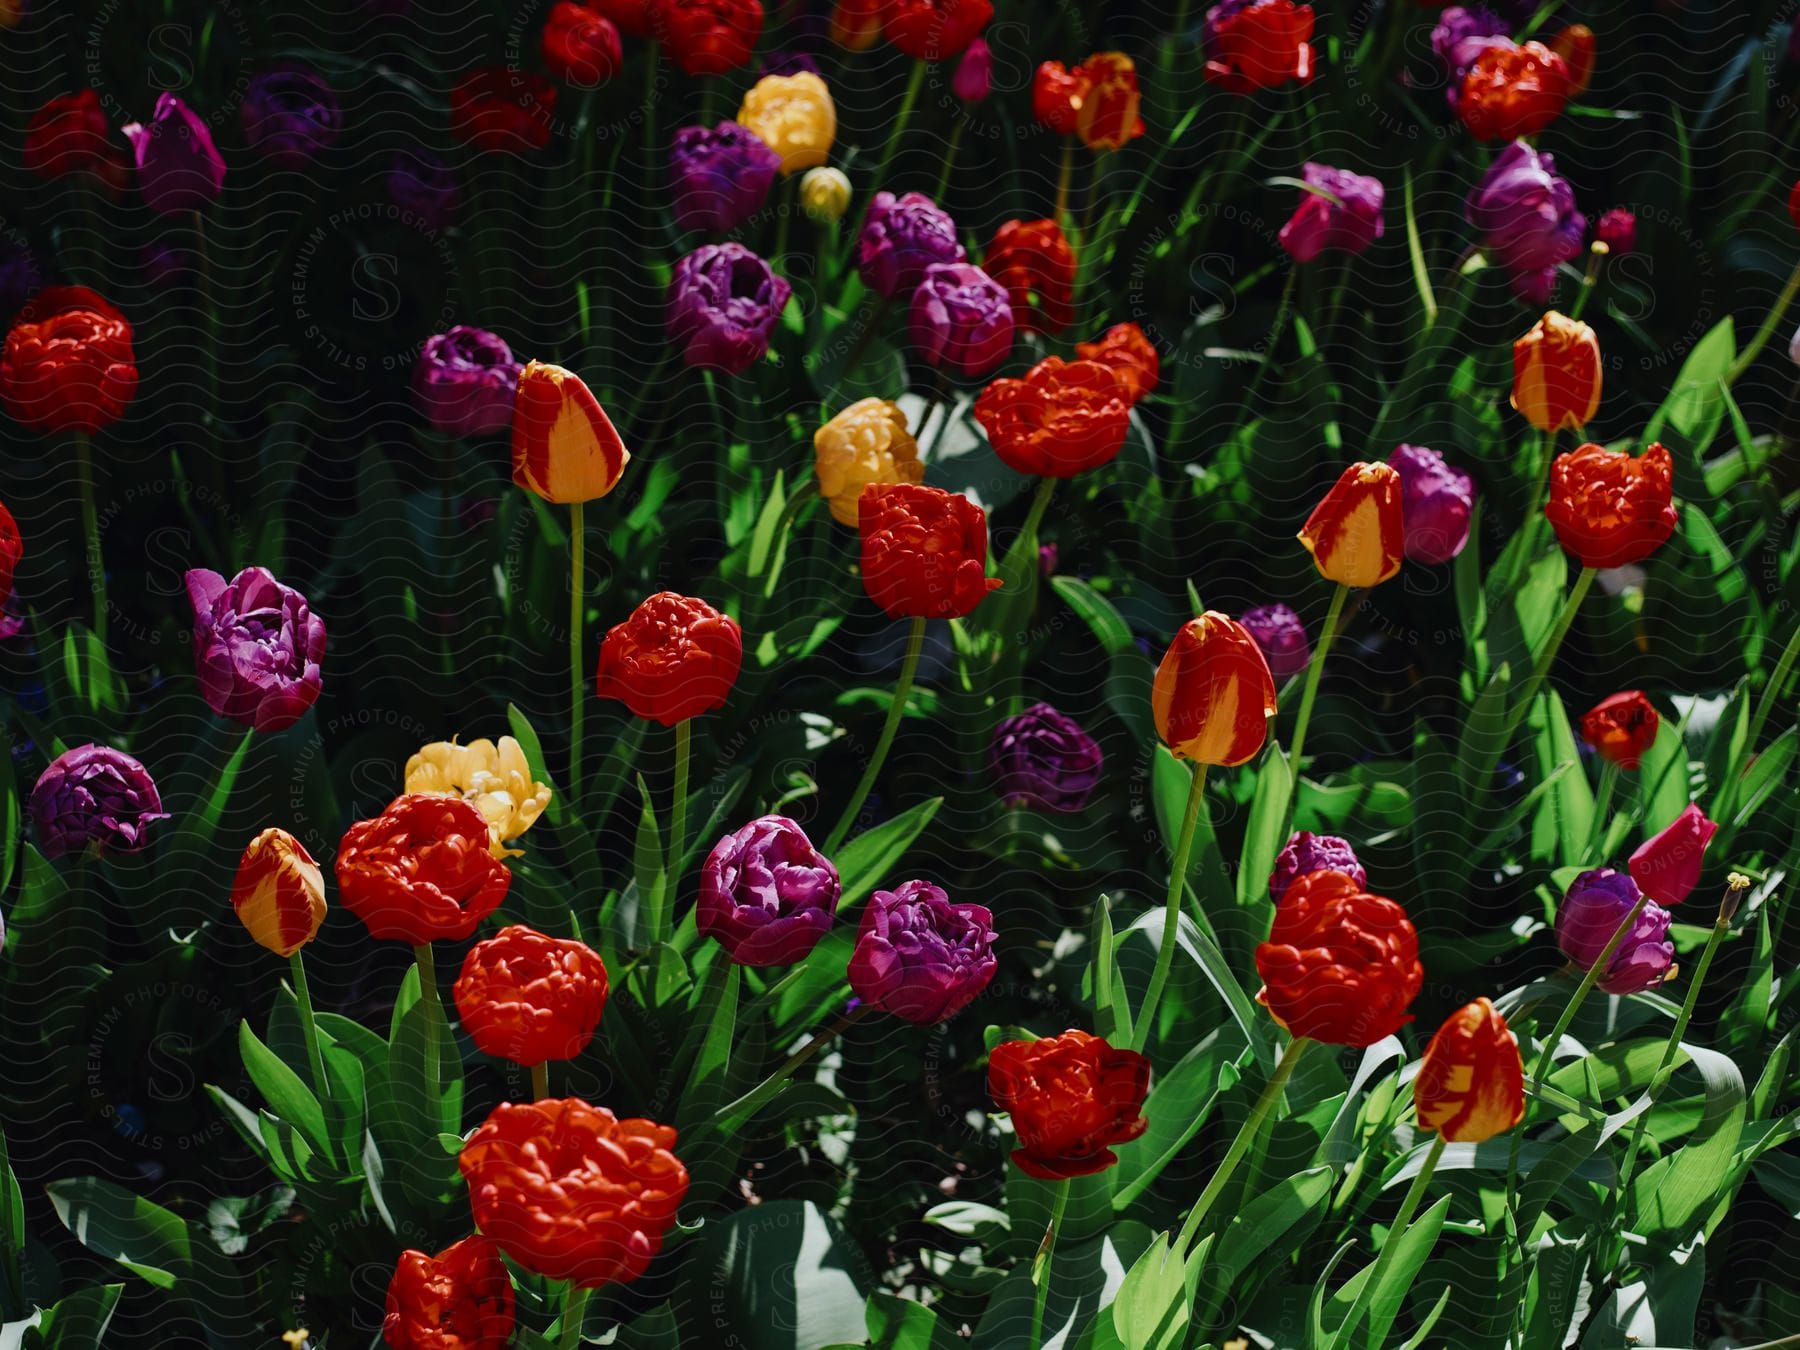 A vibrant and colorful garden of tulips in full bloom. Tulips come in a variety of colors, including purple, red, yellow, and orange.